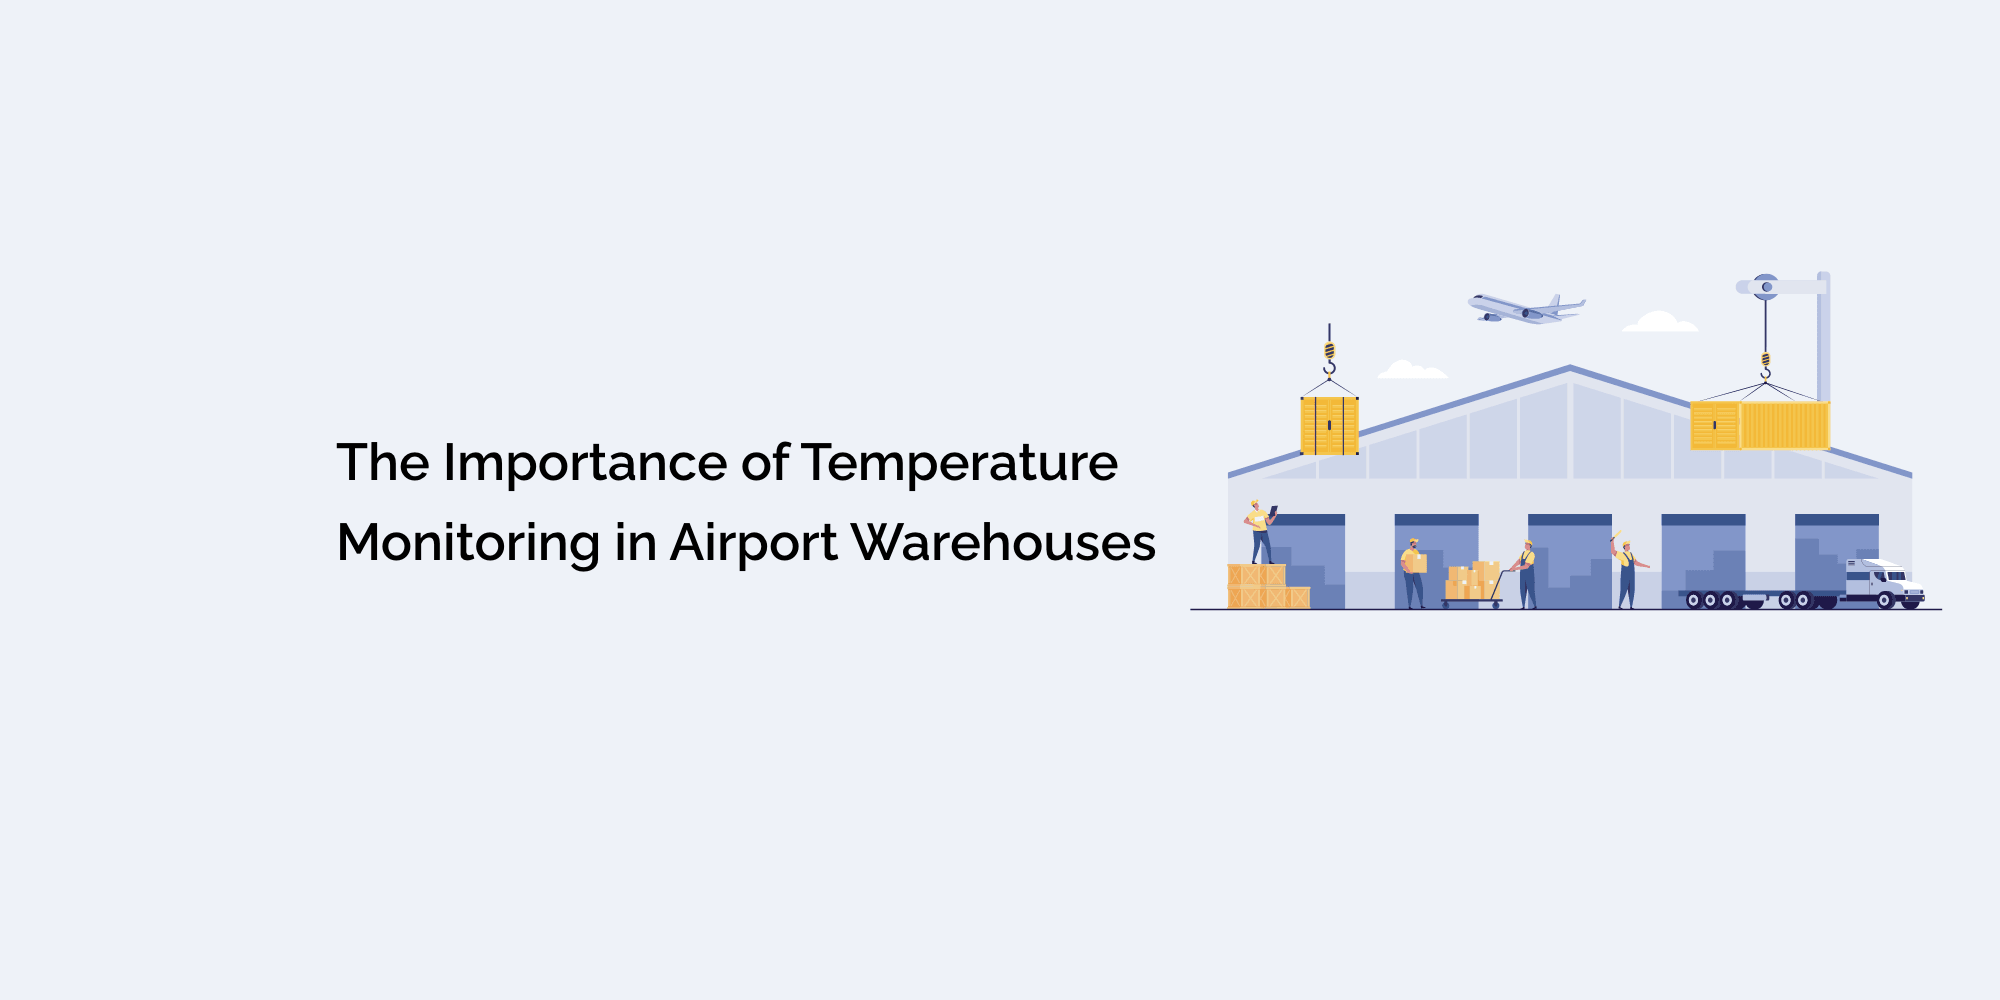 The Importance of Temperature Monitoring in Airport Warehouses